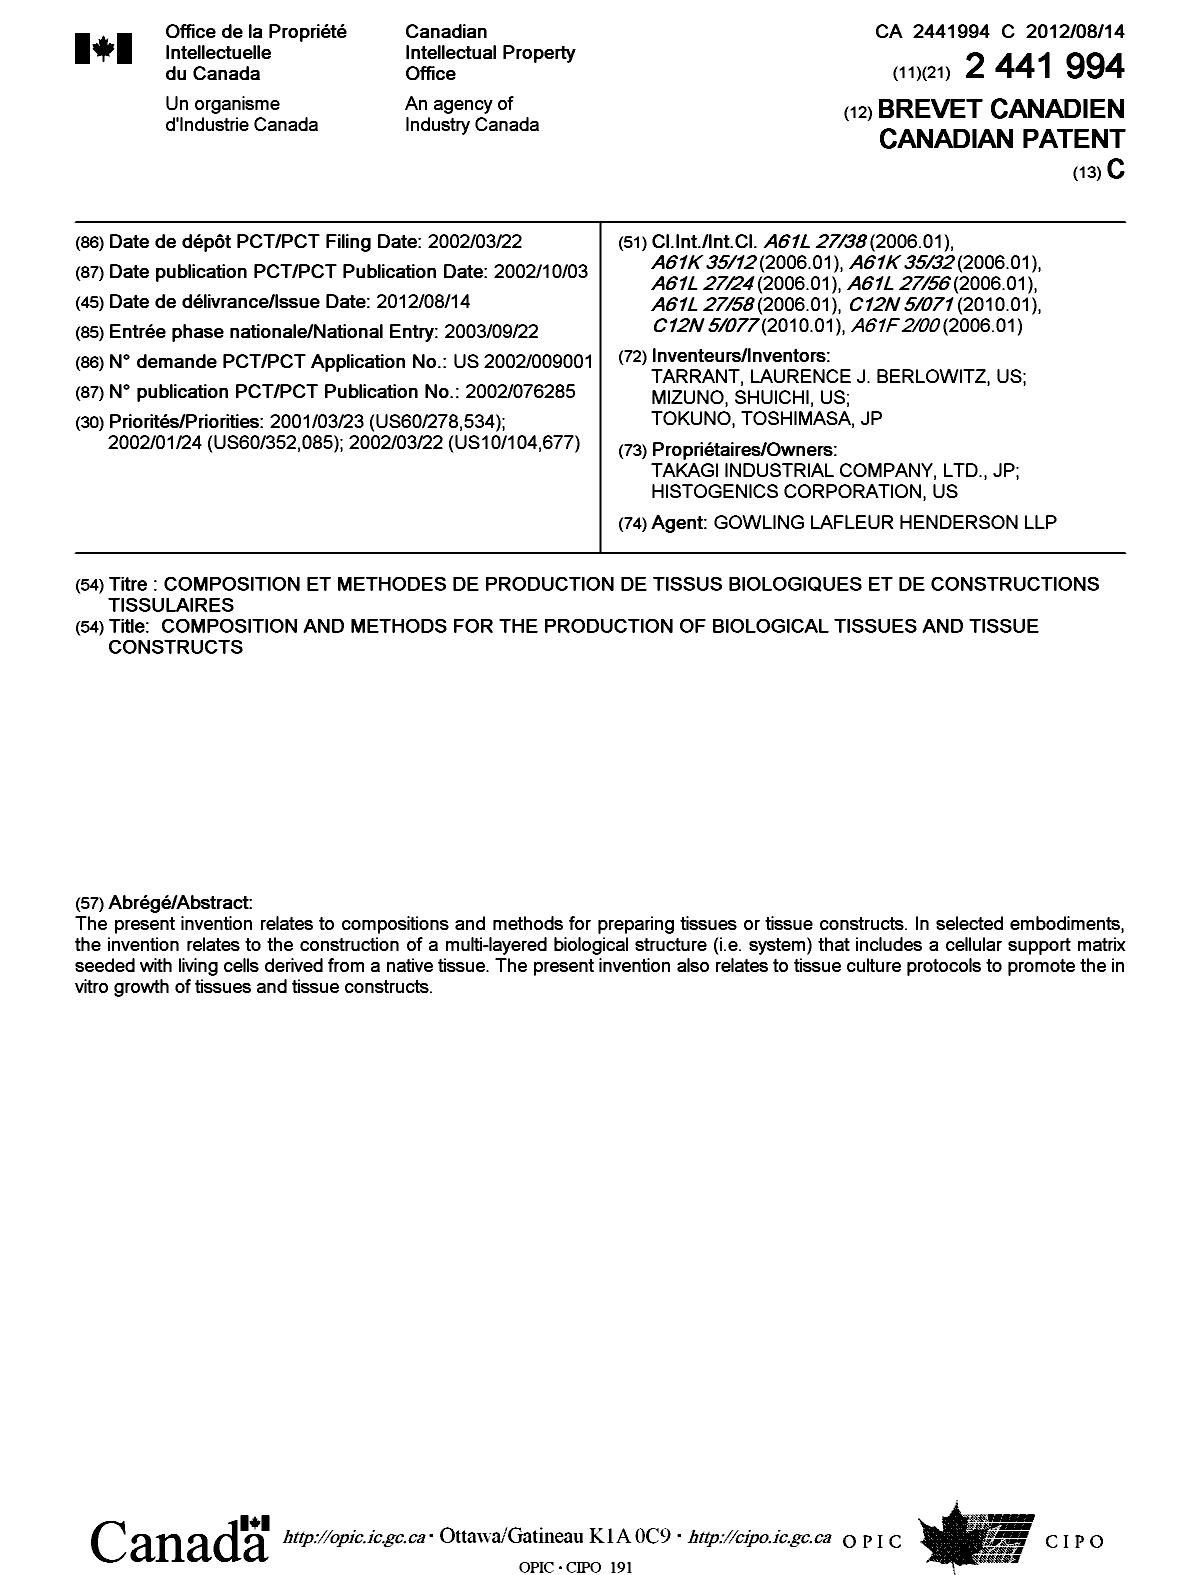 Canadian Patent Document 2441994. Cover Page 20120719. Image 1 of 1